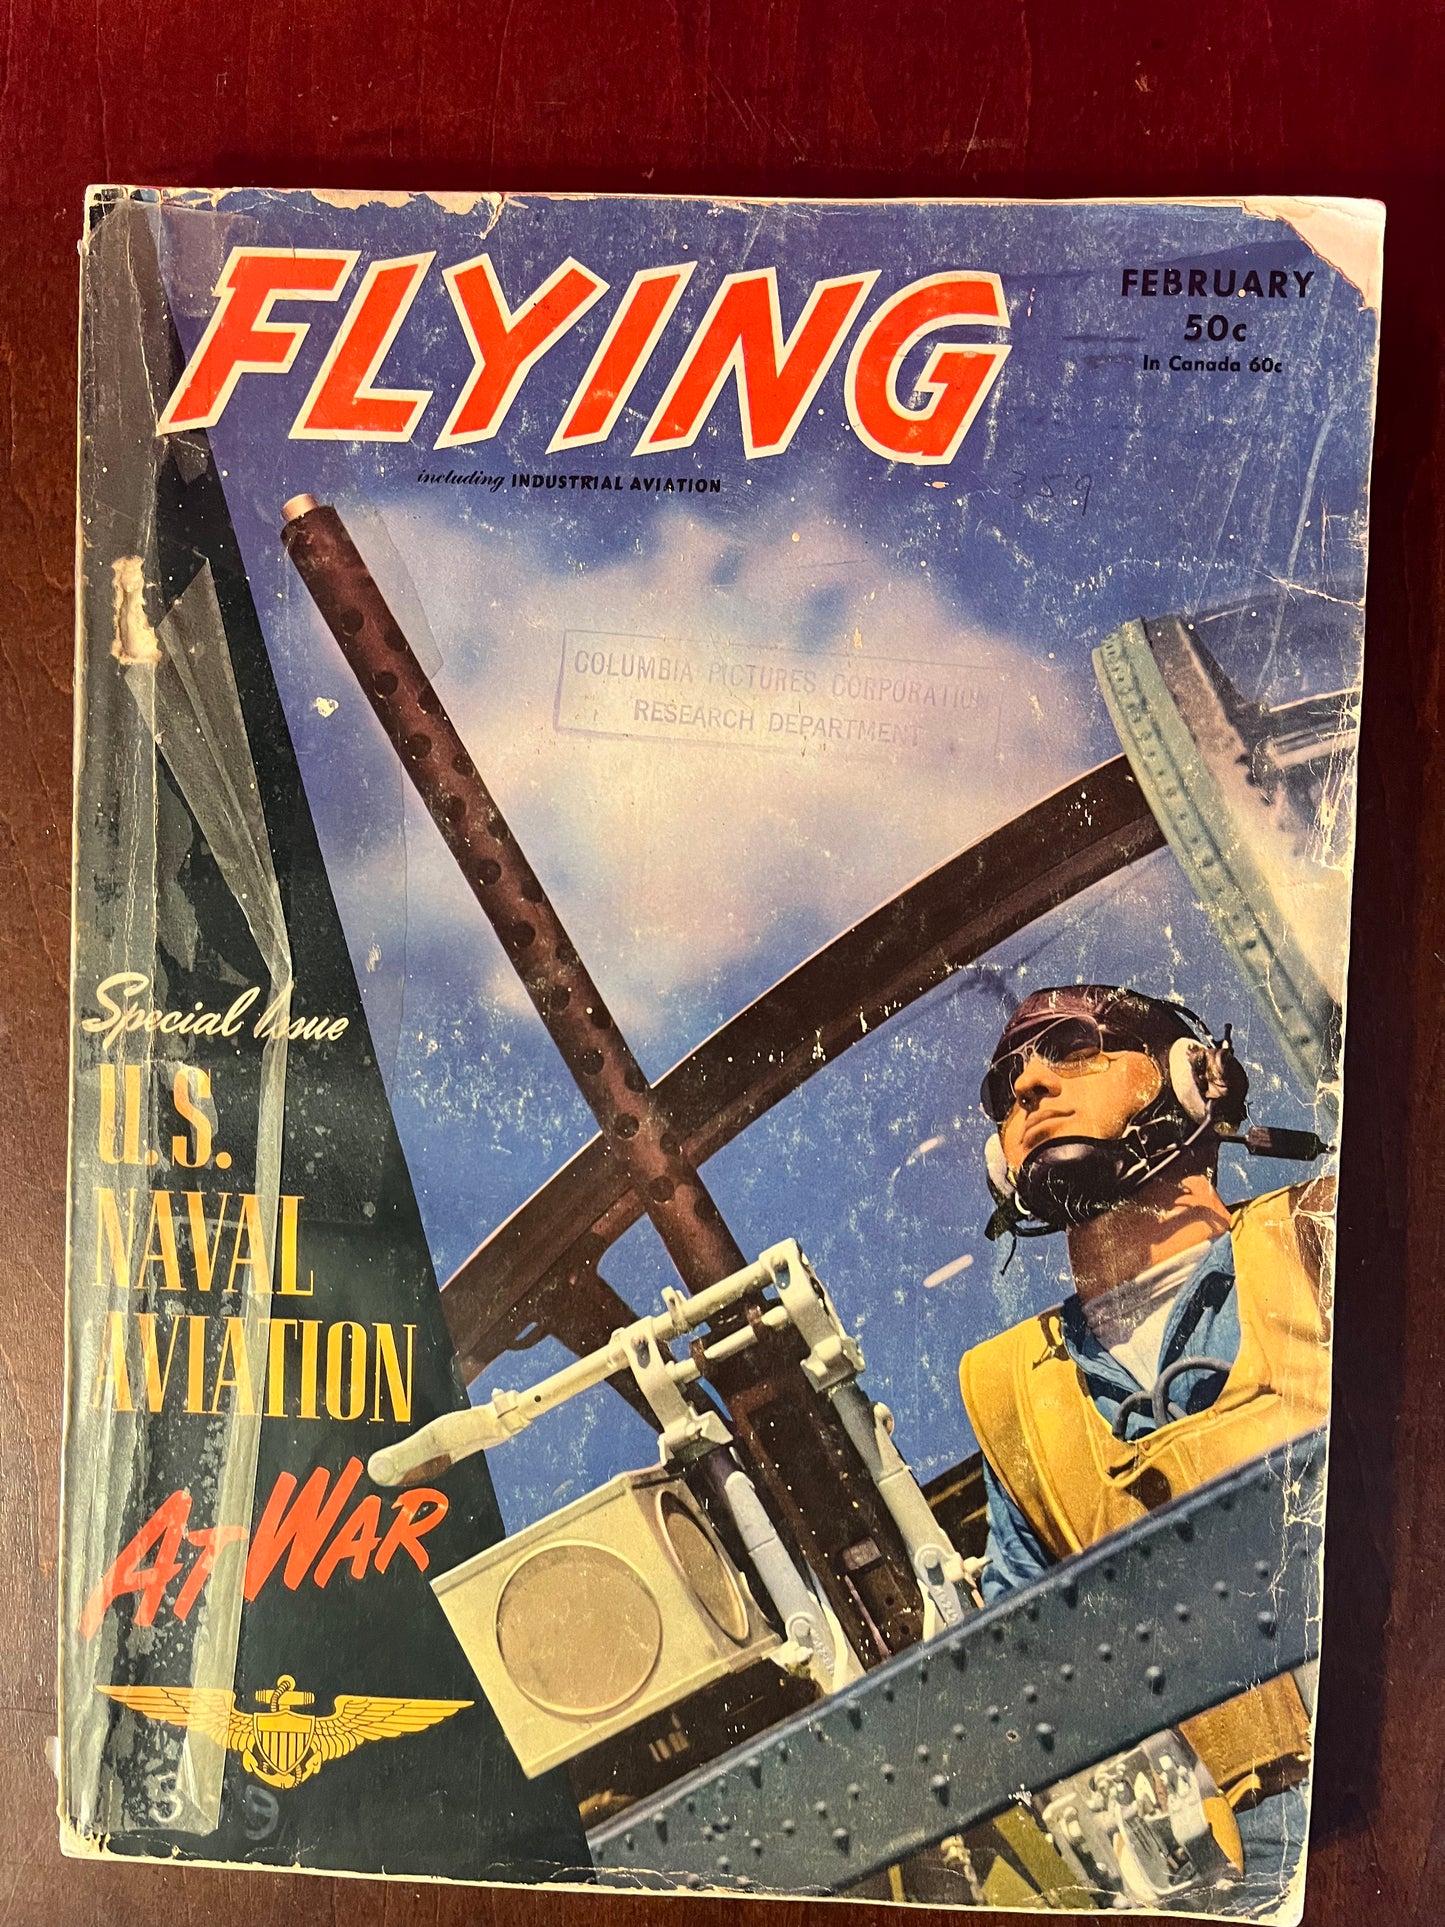 The cover art captures the intensity of wartime aviation with an image of a pilot, evoking the bravery and determination of the era.